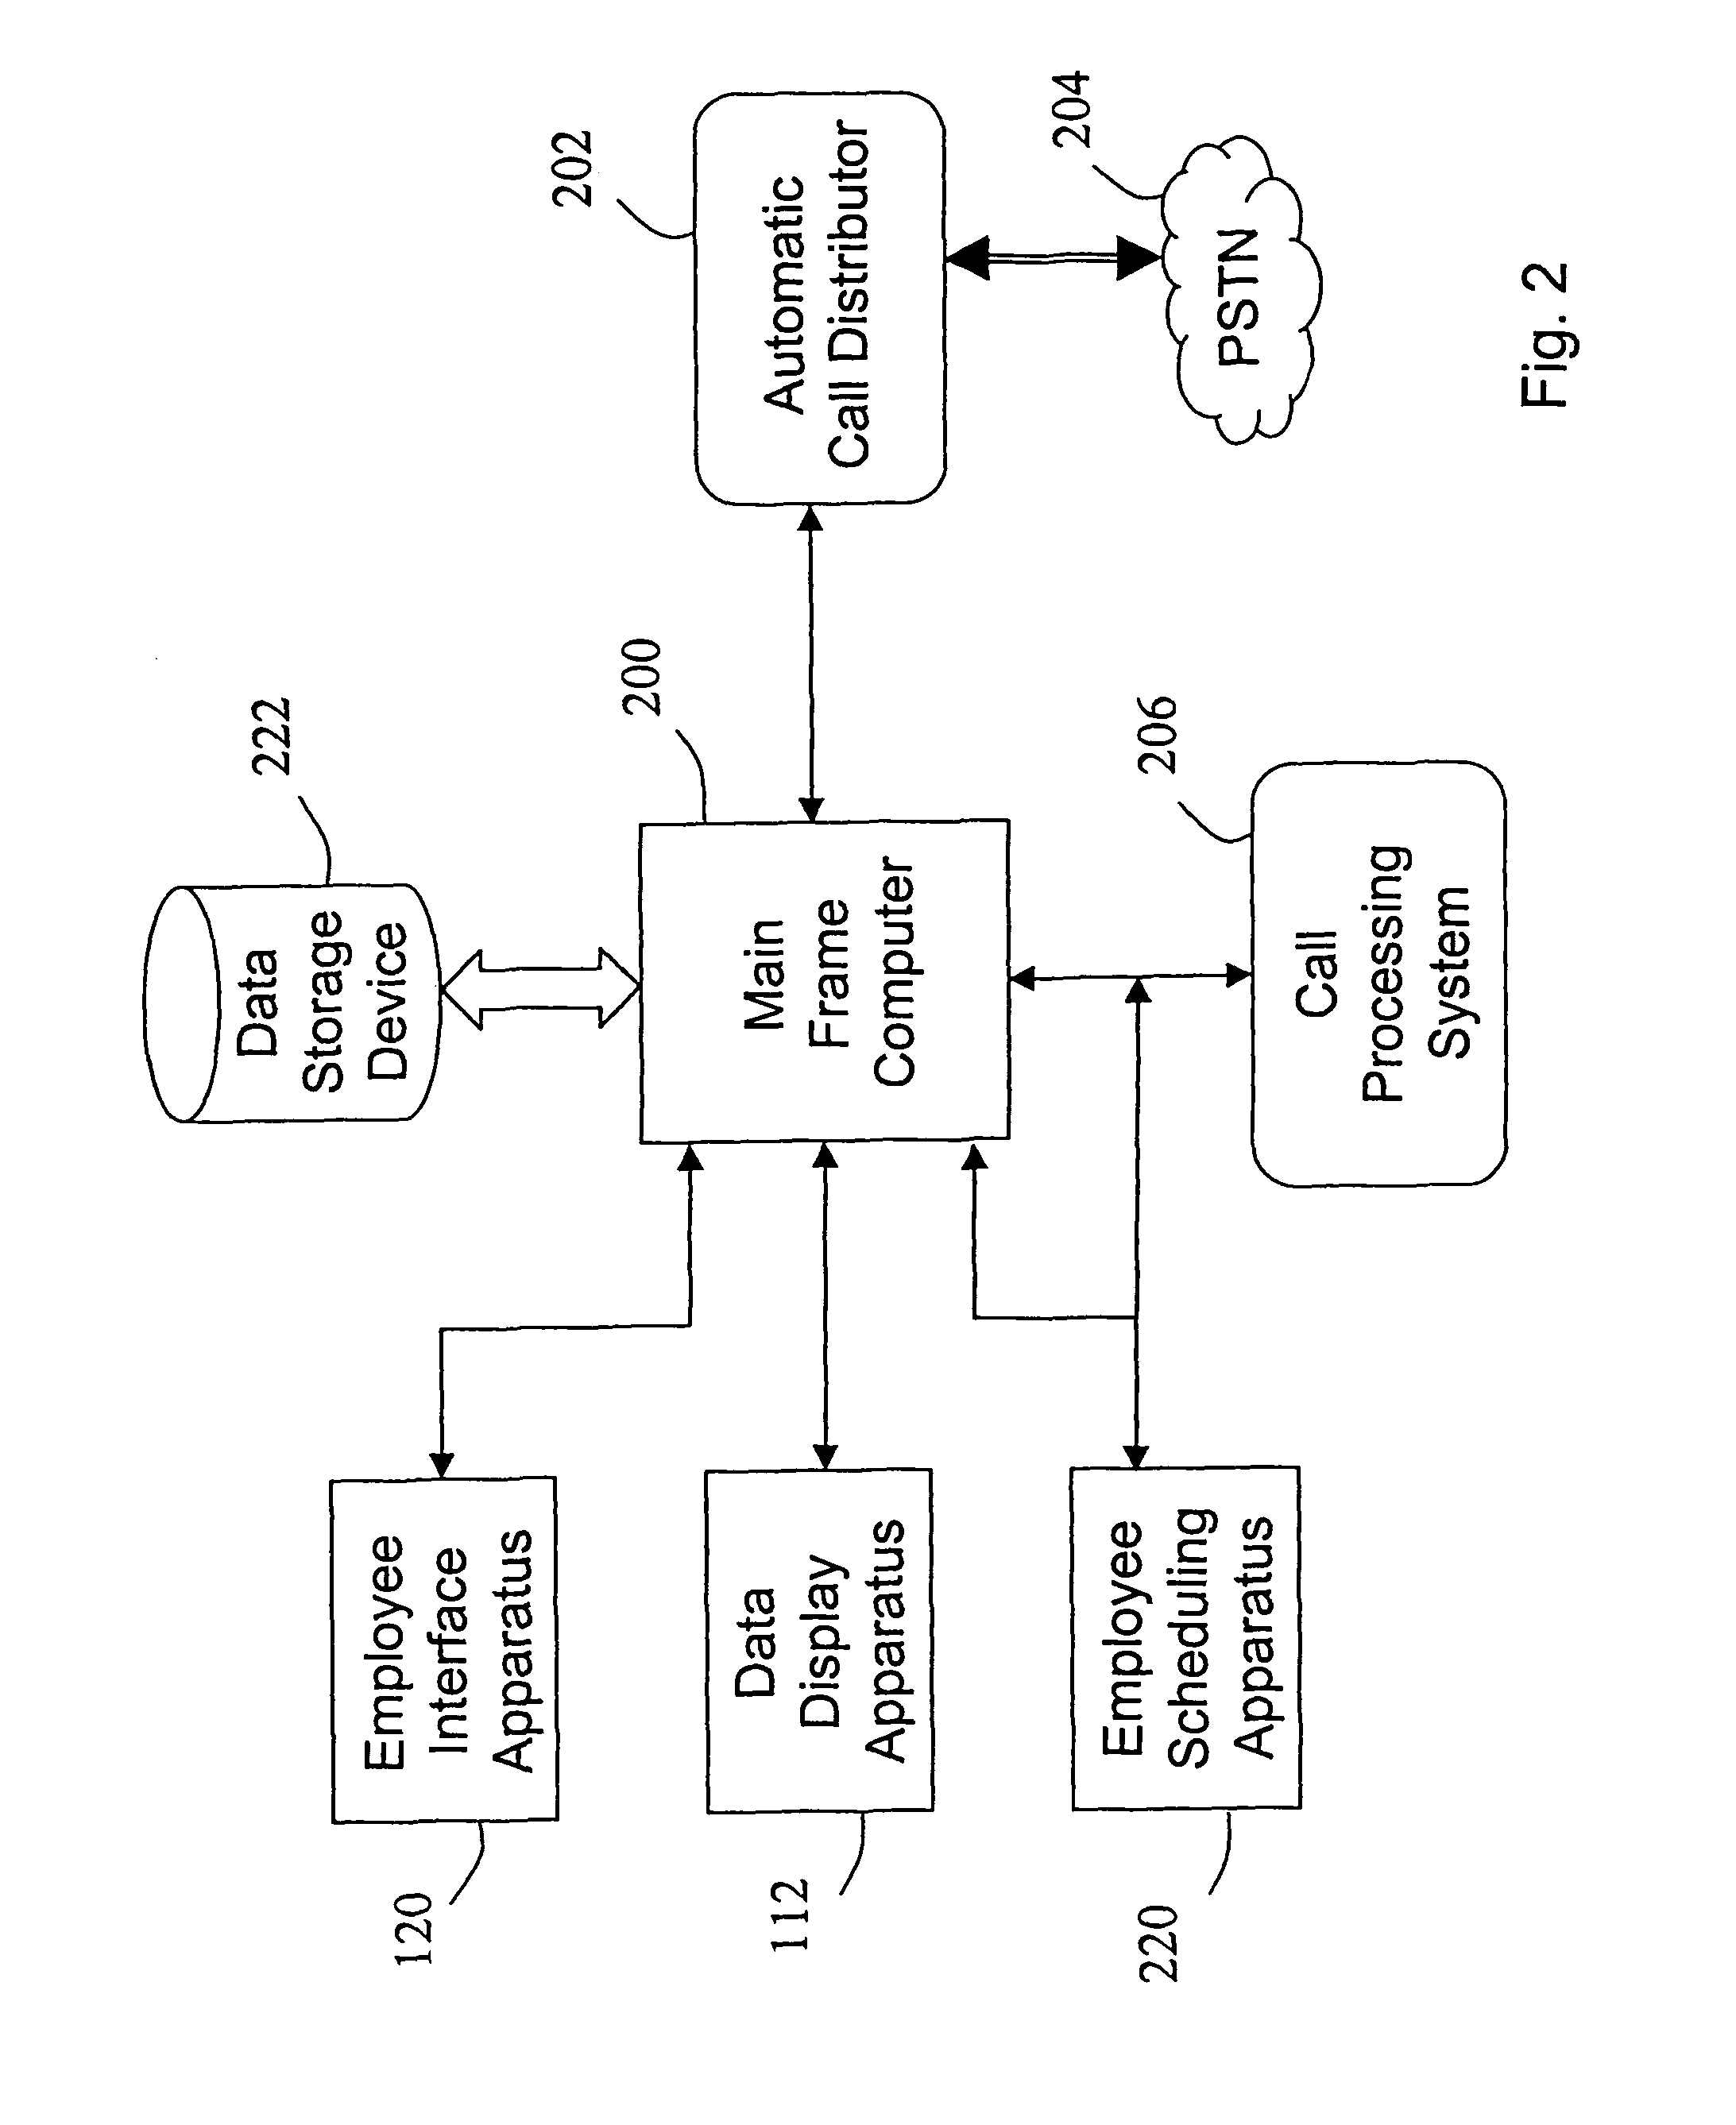 Employee scheduling and schedule modification method and apparatus